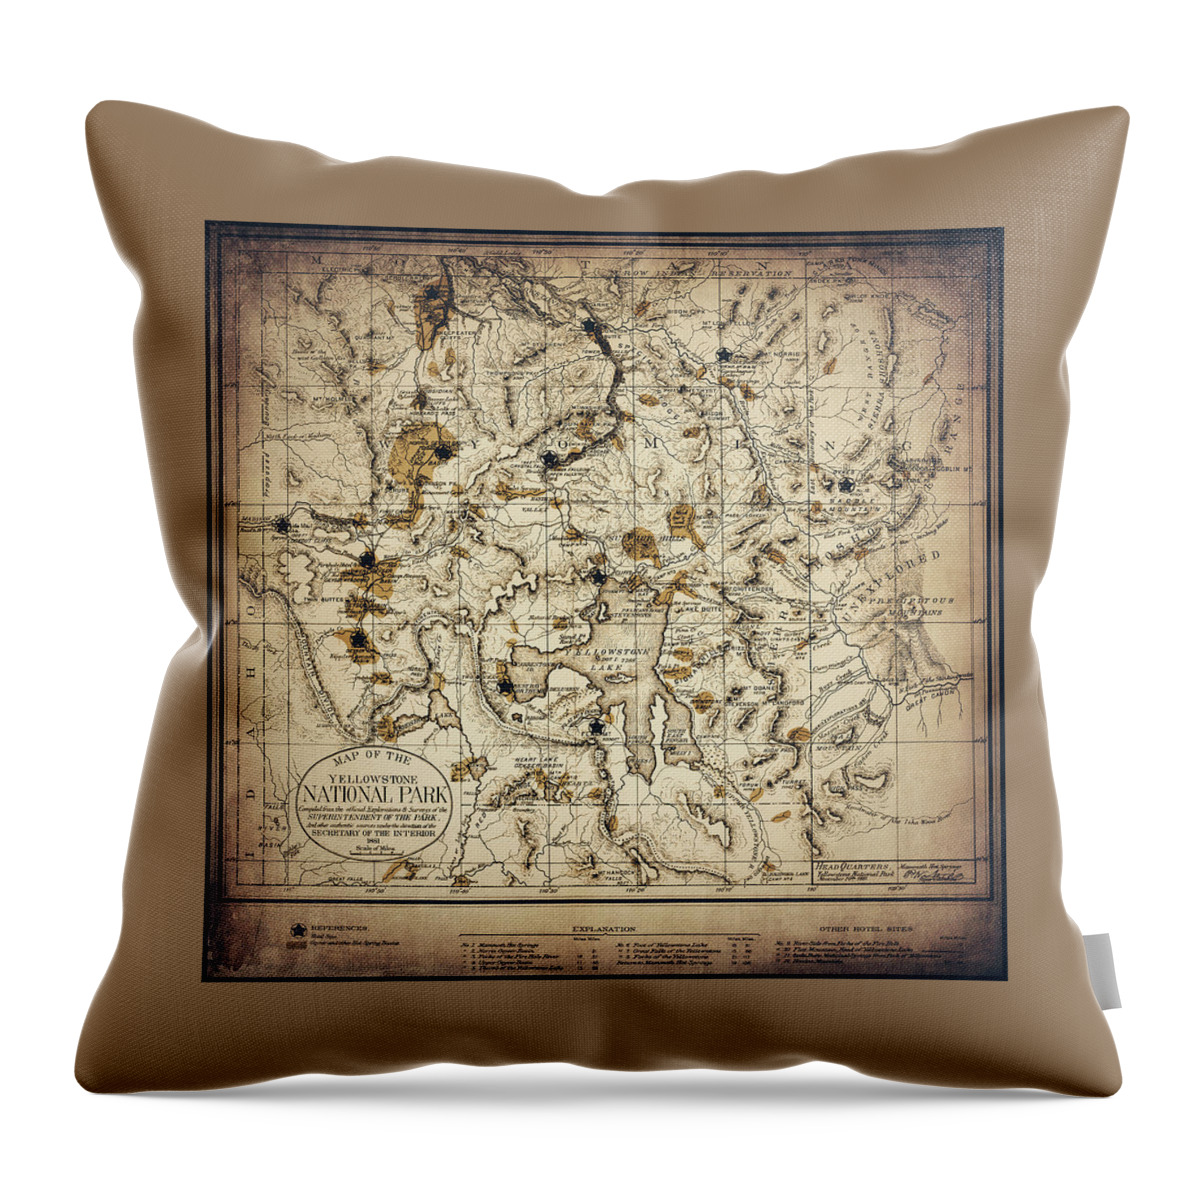 Yellowstone Throw Pillow featuring the photograph Yellowstone National Park Vintage Map 1881 Sepia by Carol Japp